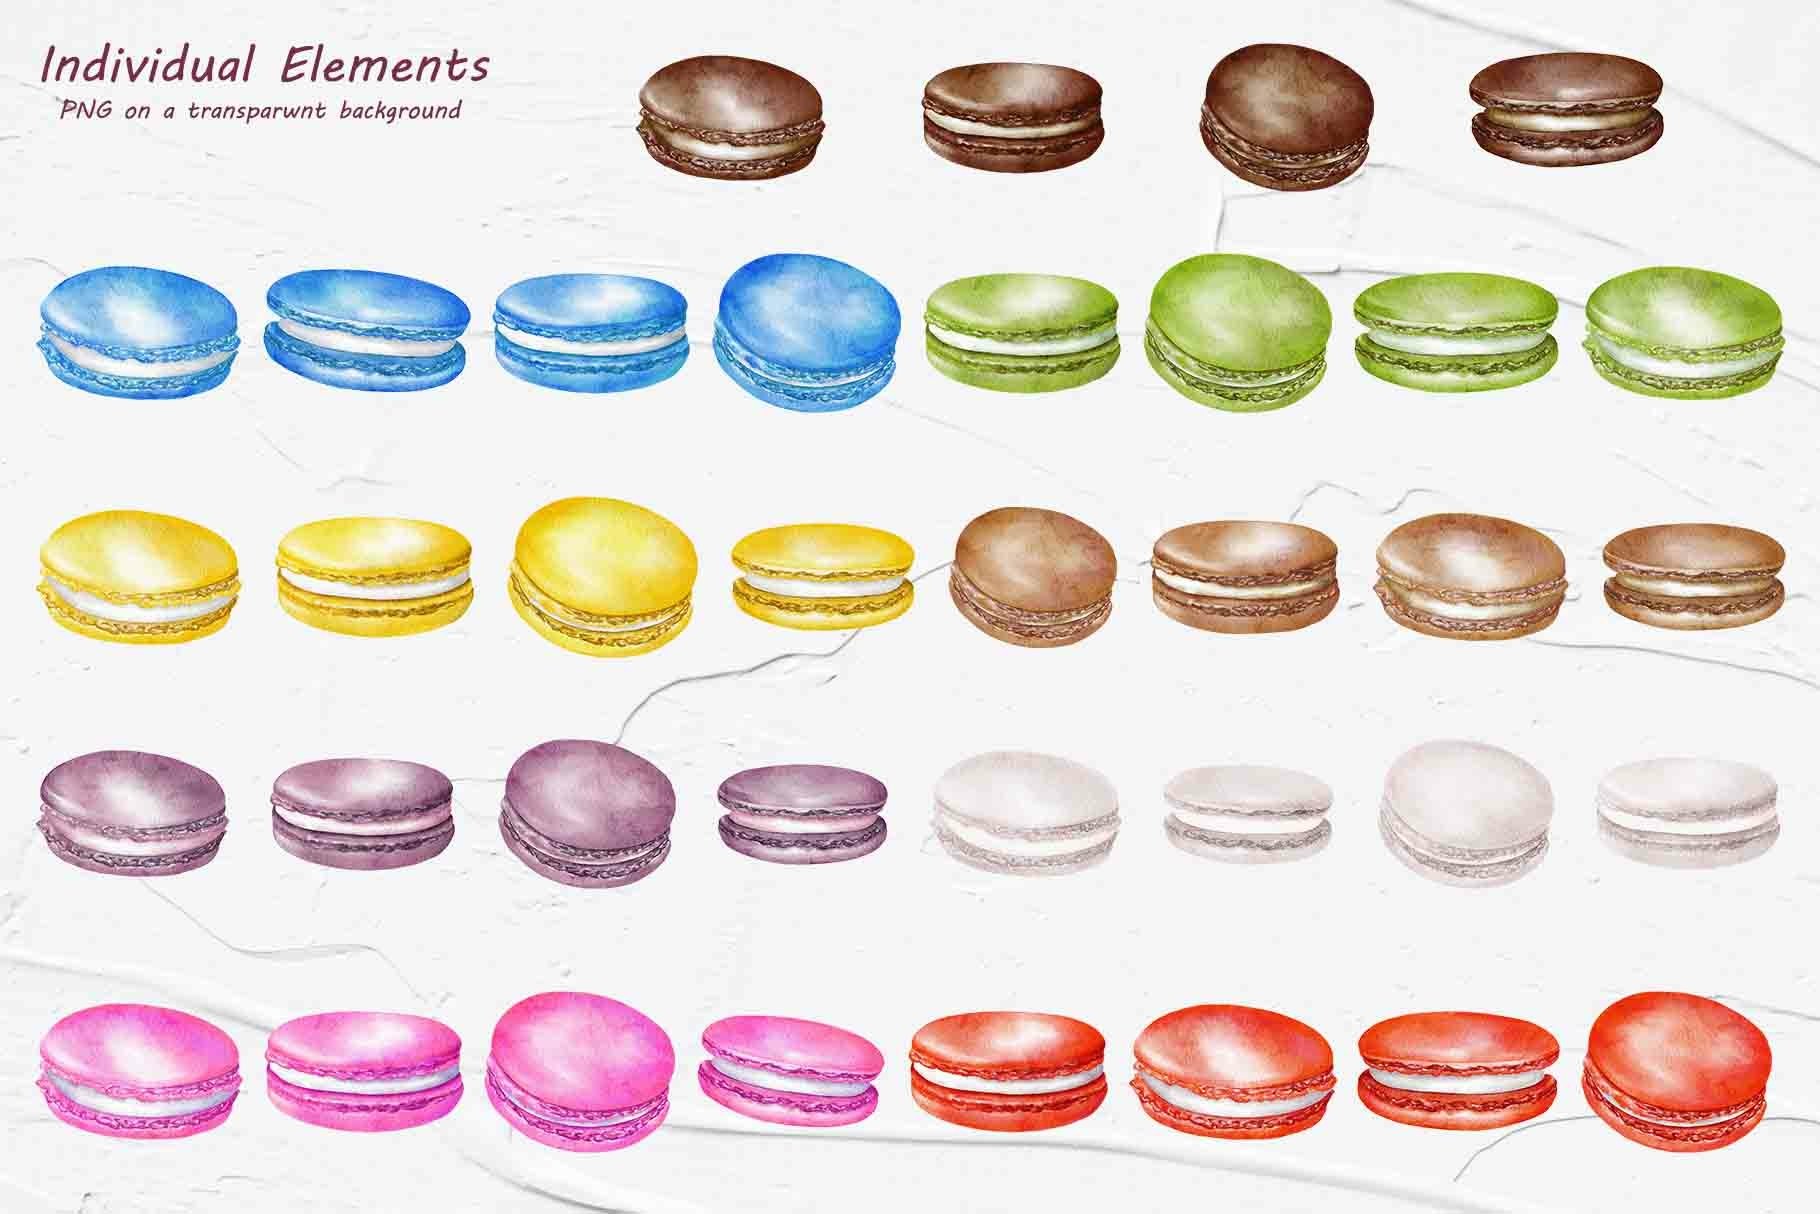 Diverse of macaroons for your collection.